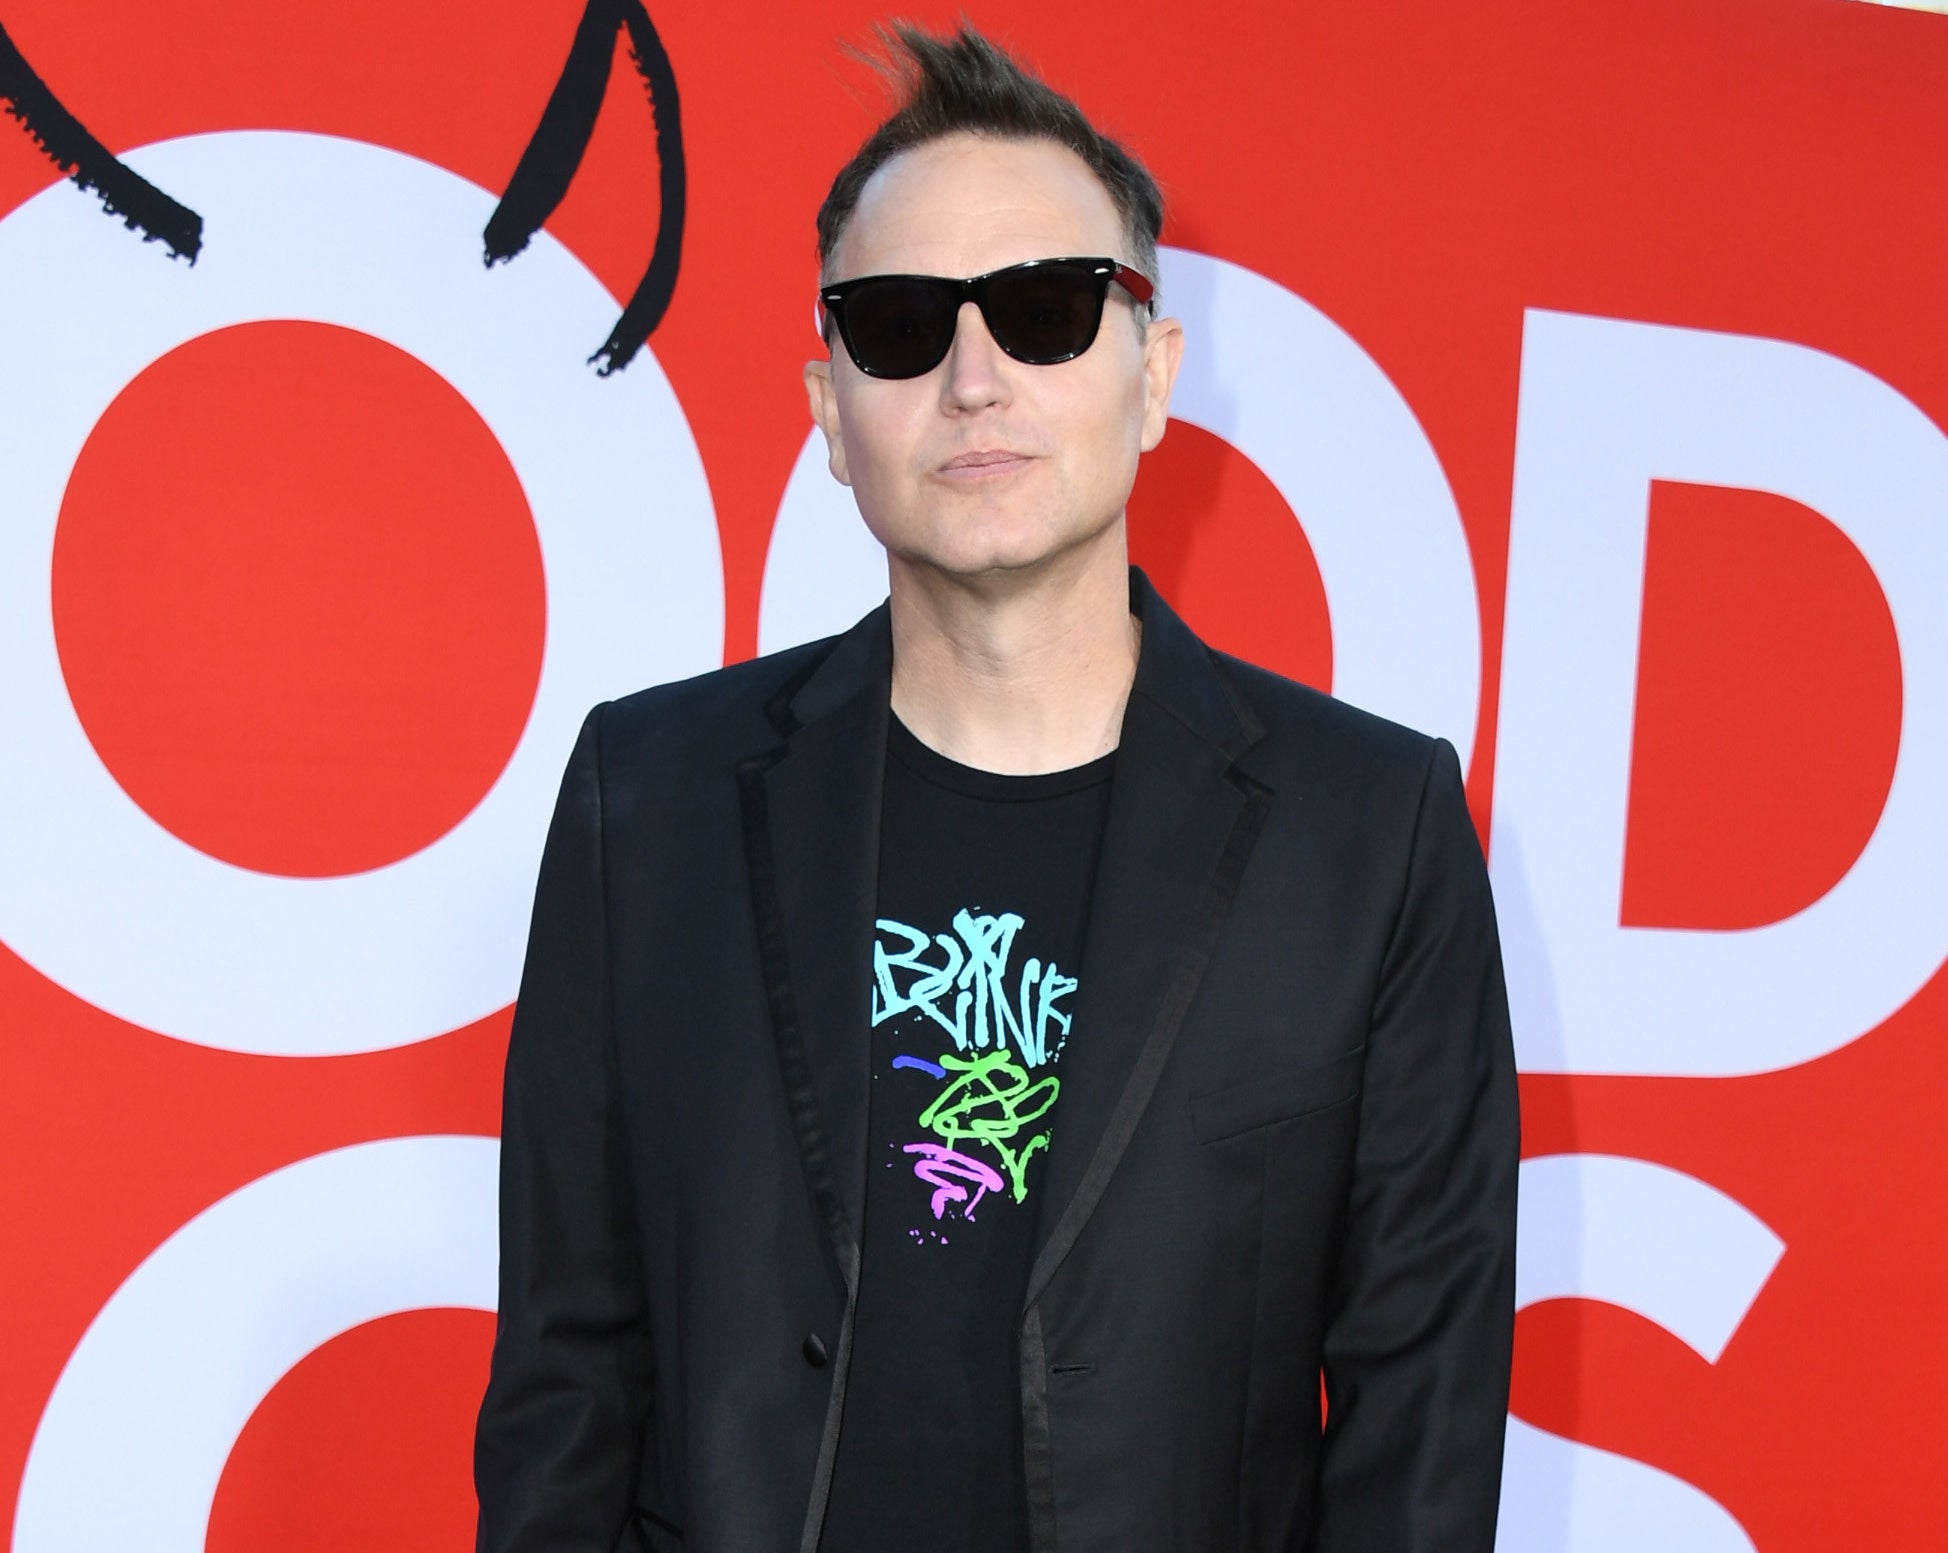 Mark wears sunglasses and a suit jacket over a Blink 182 t-shirt